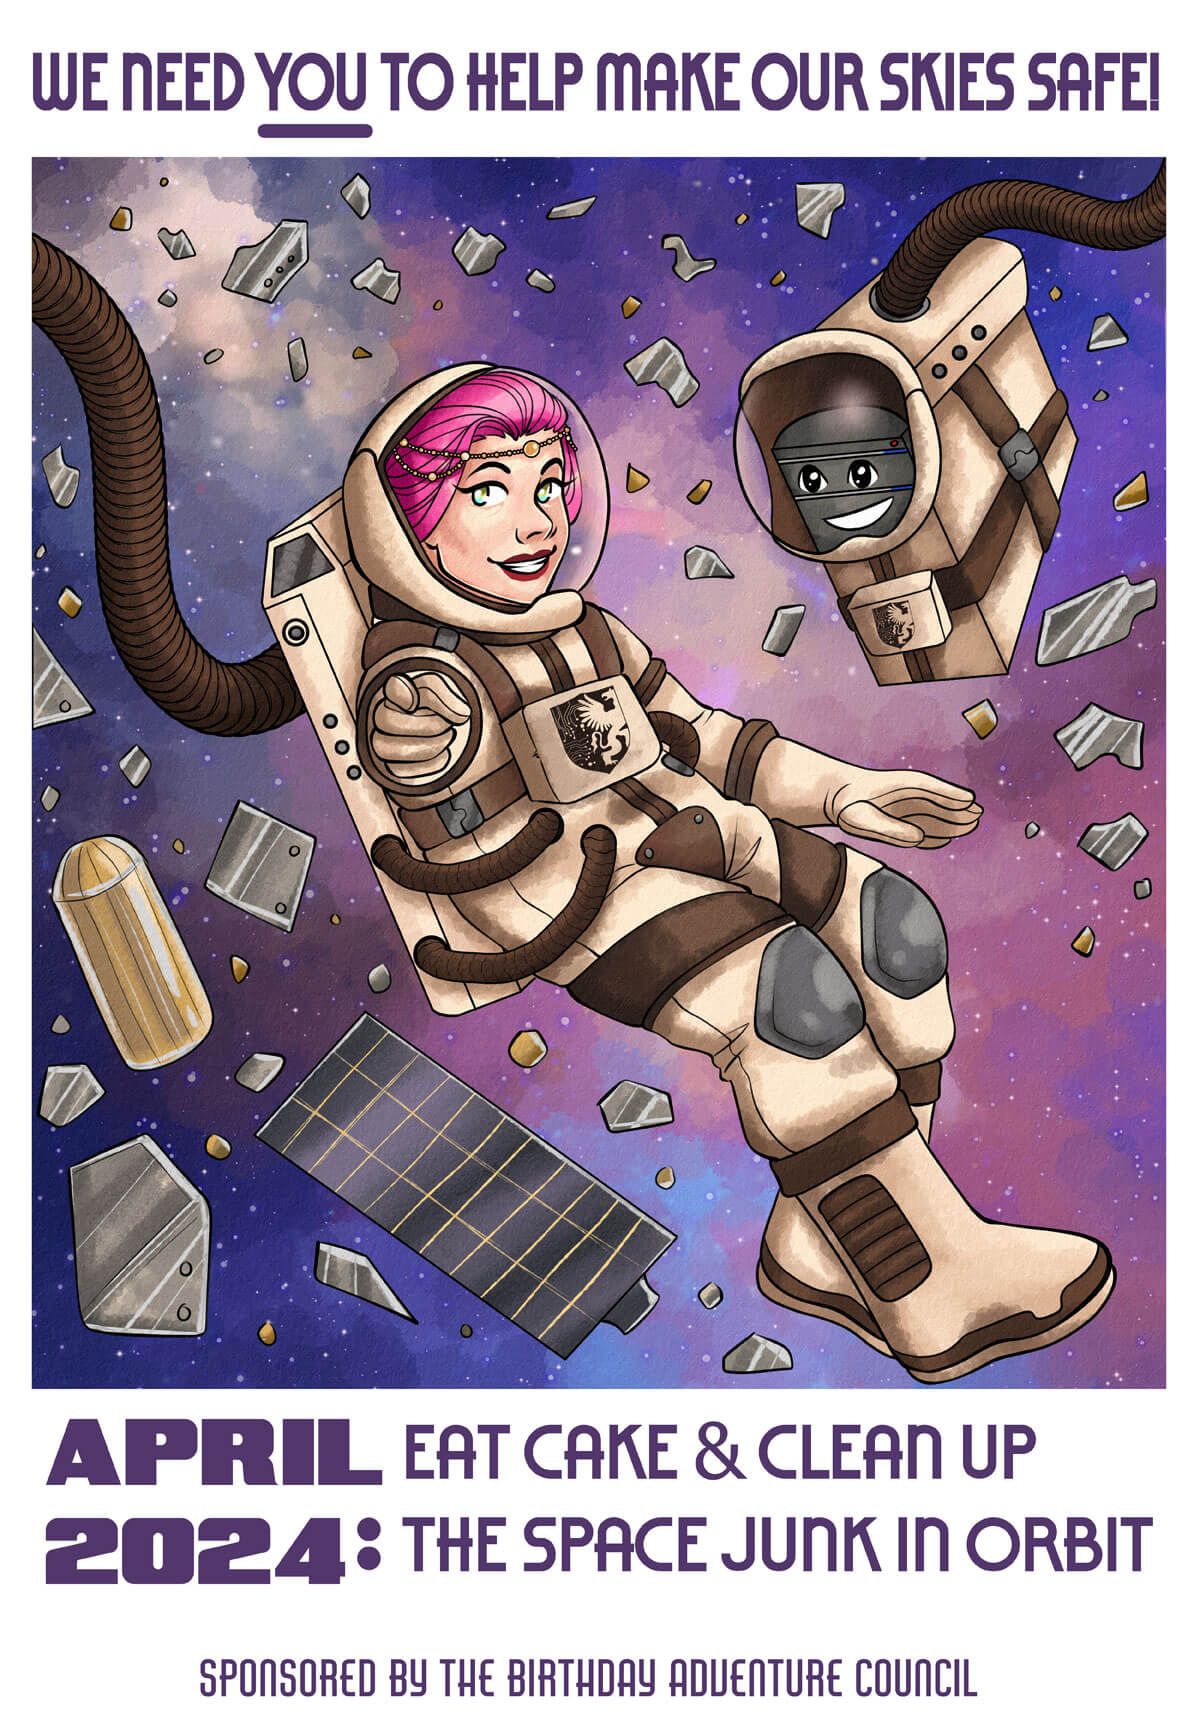 Kim and Server are floating in space. They are wearing space suits and helmets. All around them, metal debris floats against a backdrop of the cosmos. Kim points directly toward the viewer. Text: We need YOU to help make our skies safe! April 2024: Eat cake & clean up the space junk in orbit. Sponsored by the Birthday Adventure council.